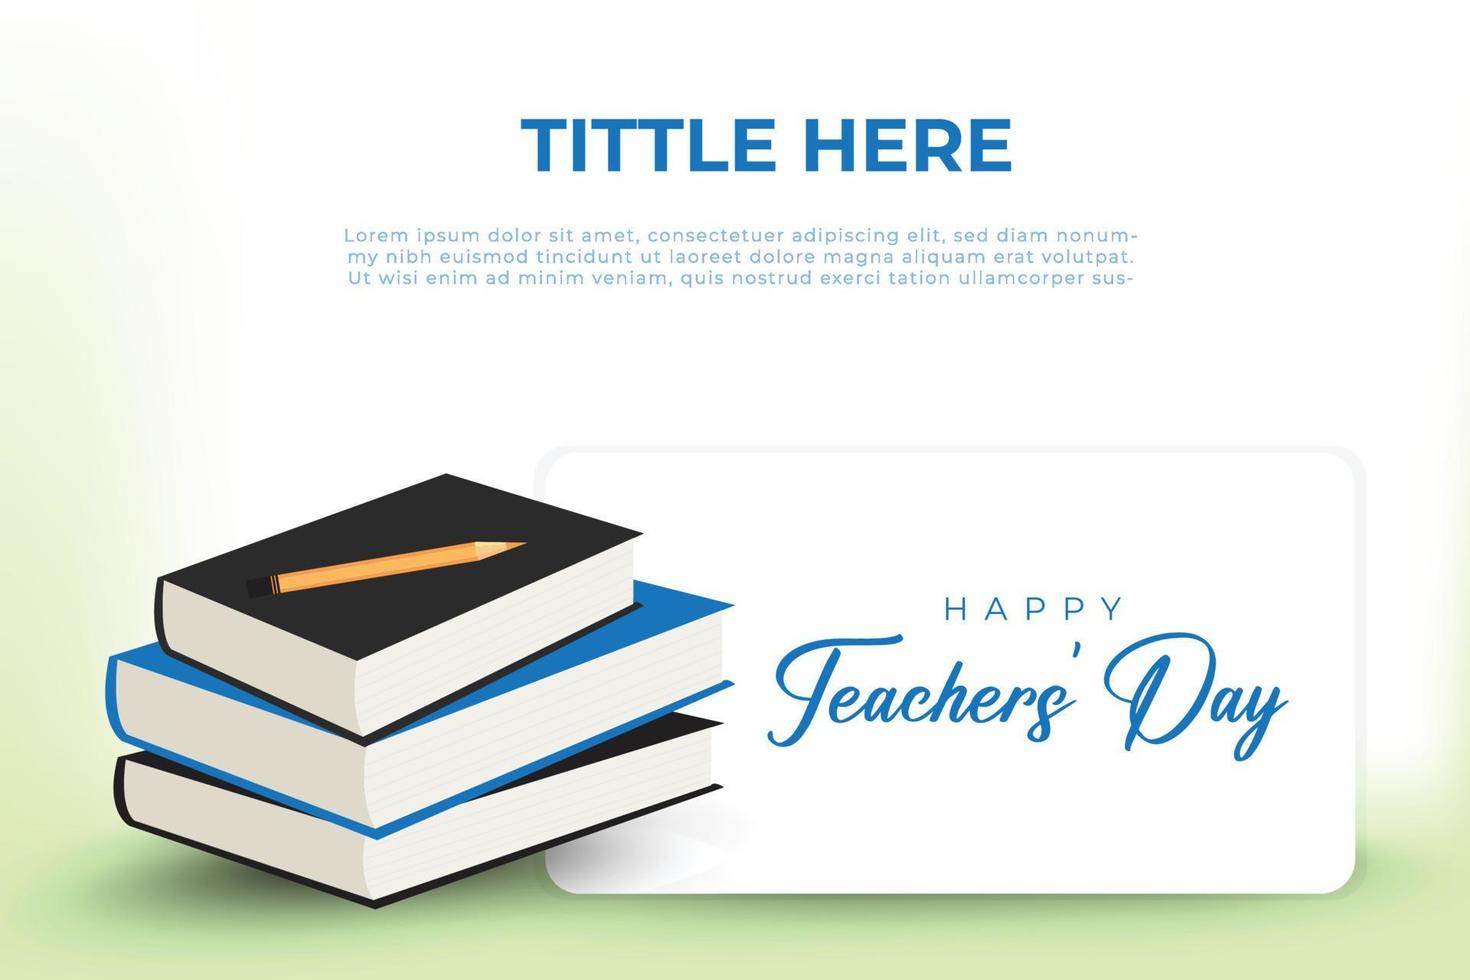 Happy teachers' day social media banner design template with education elements vector